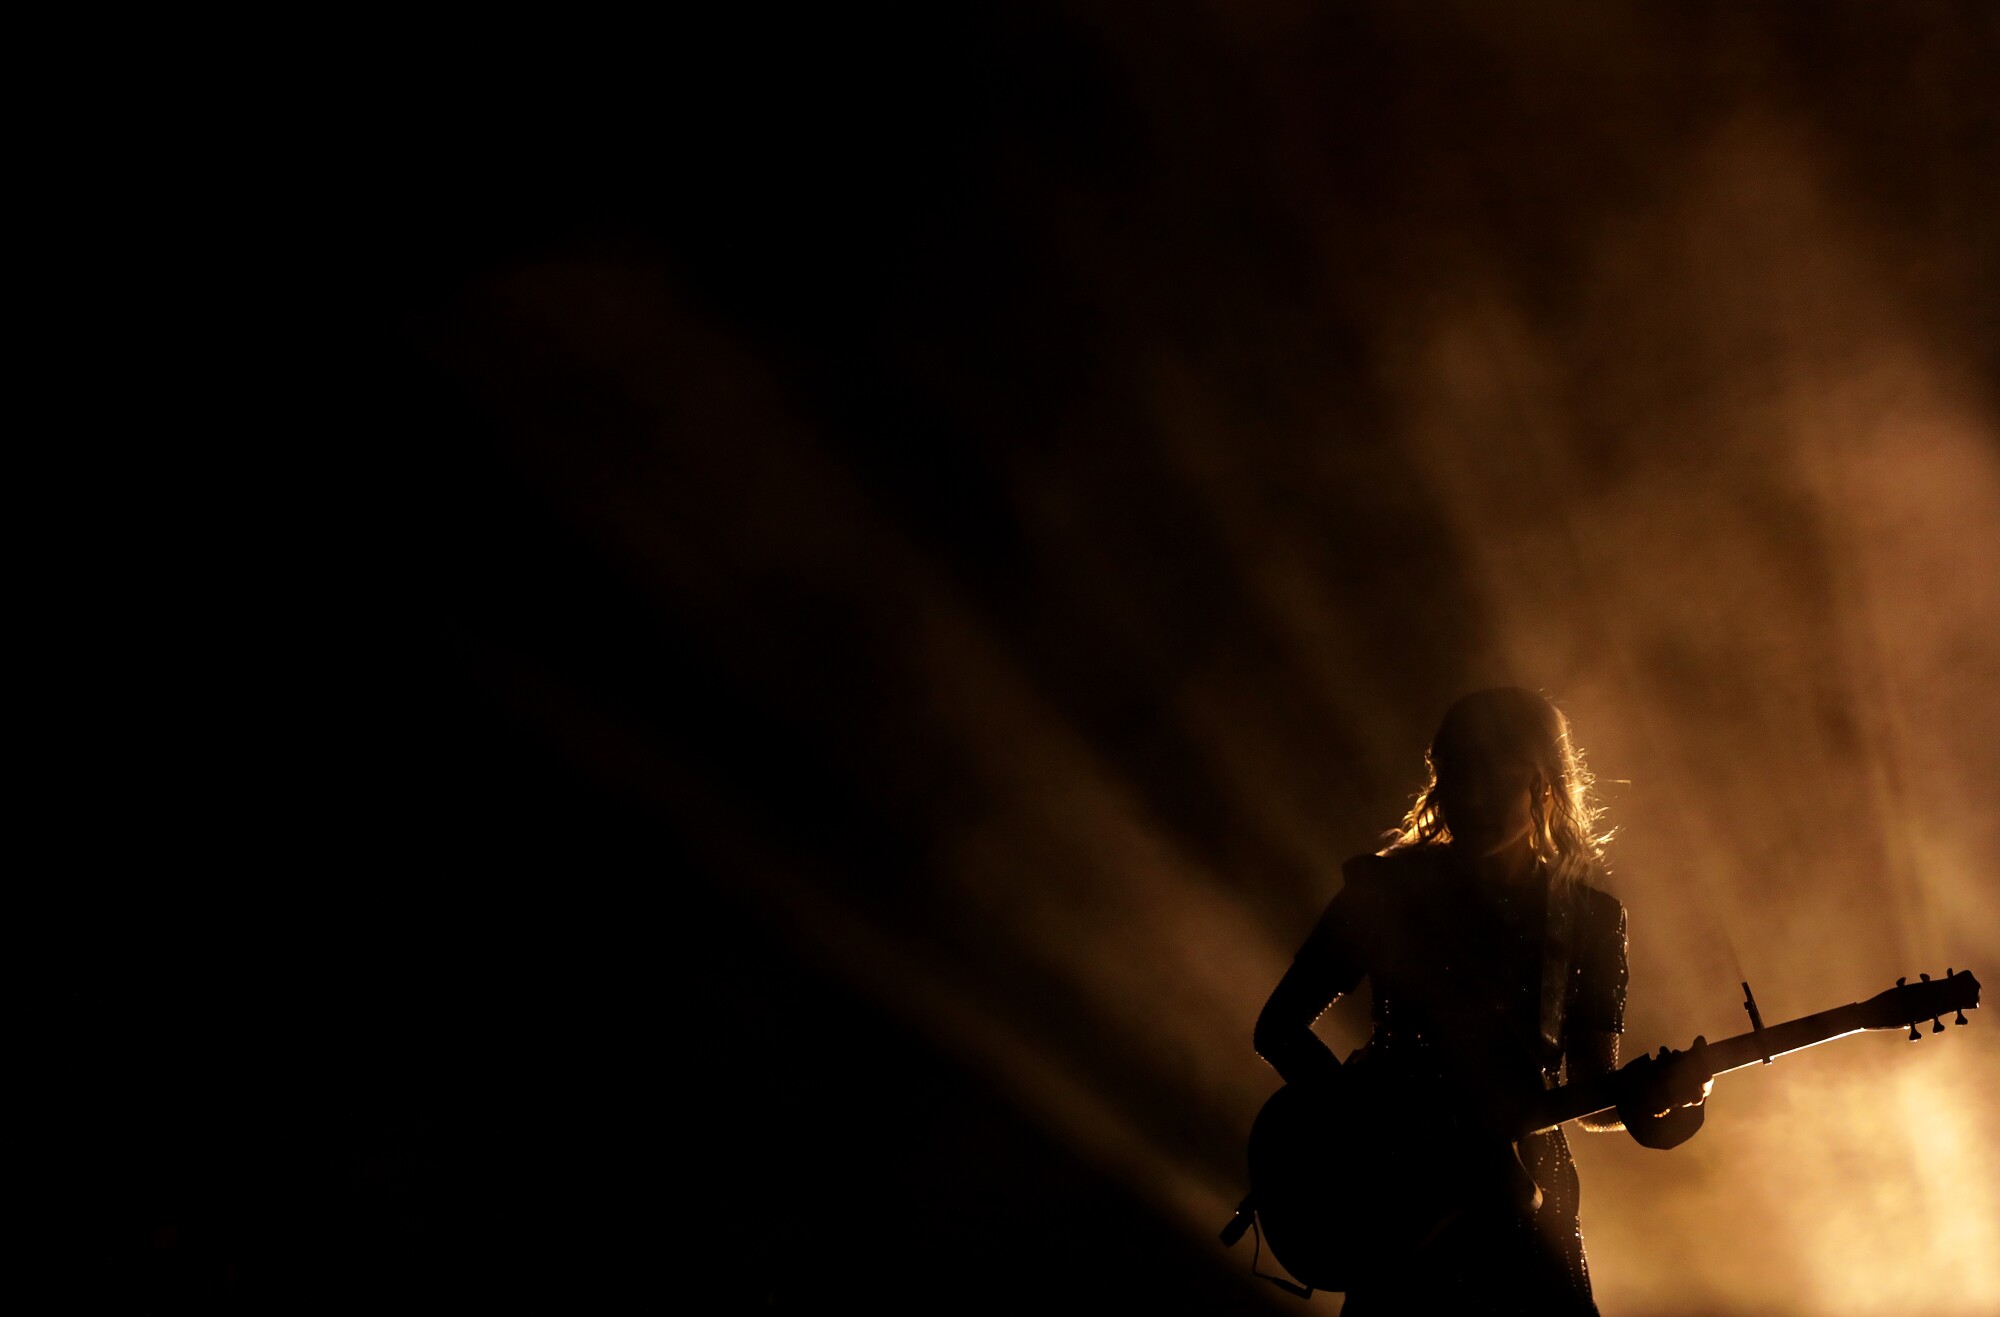 A woman is backlighted while she plays a guitar on a dark stage.